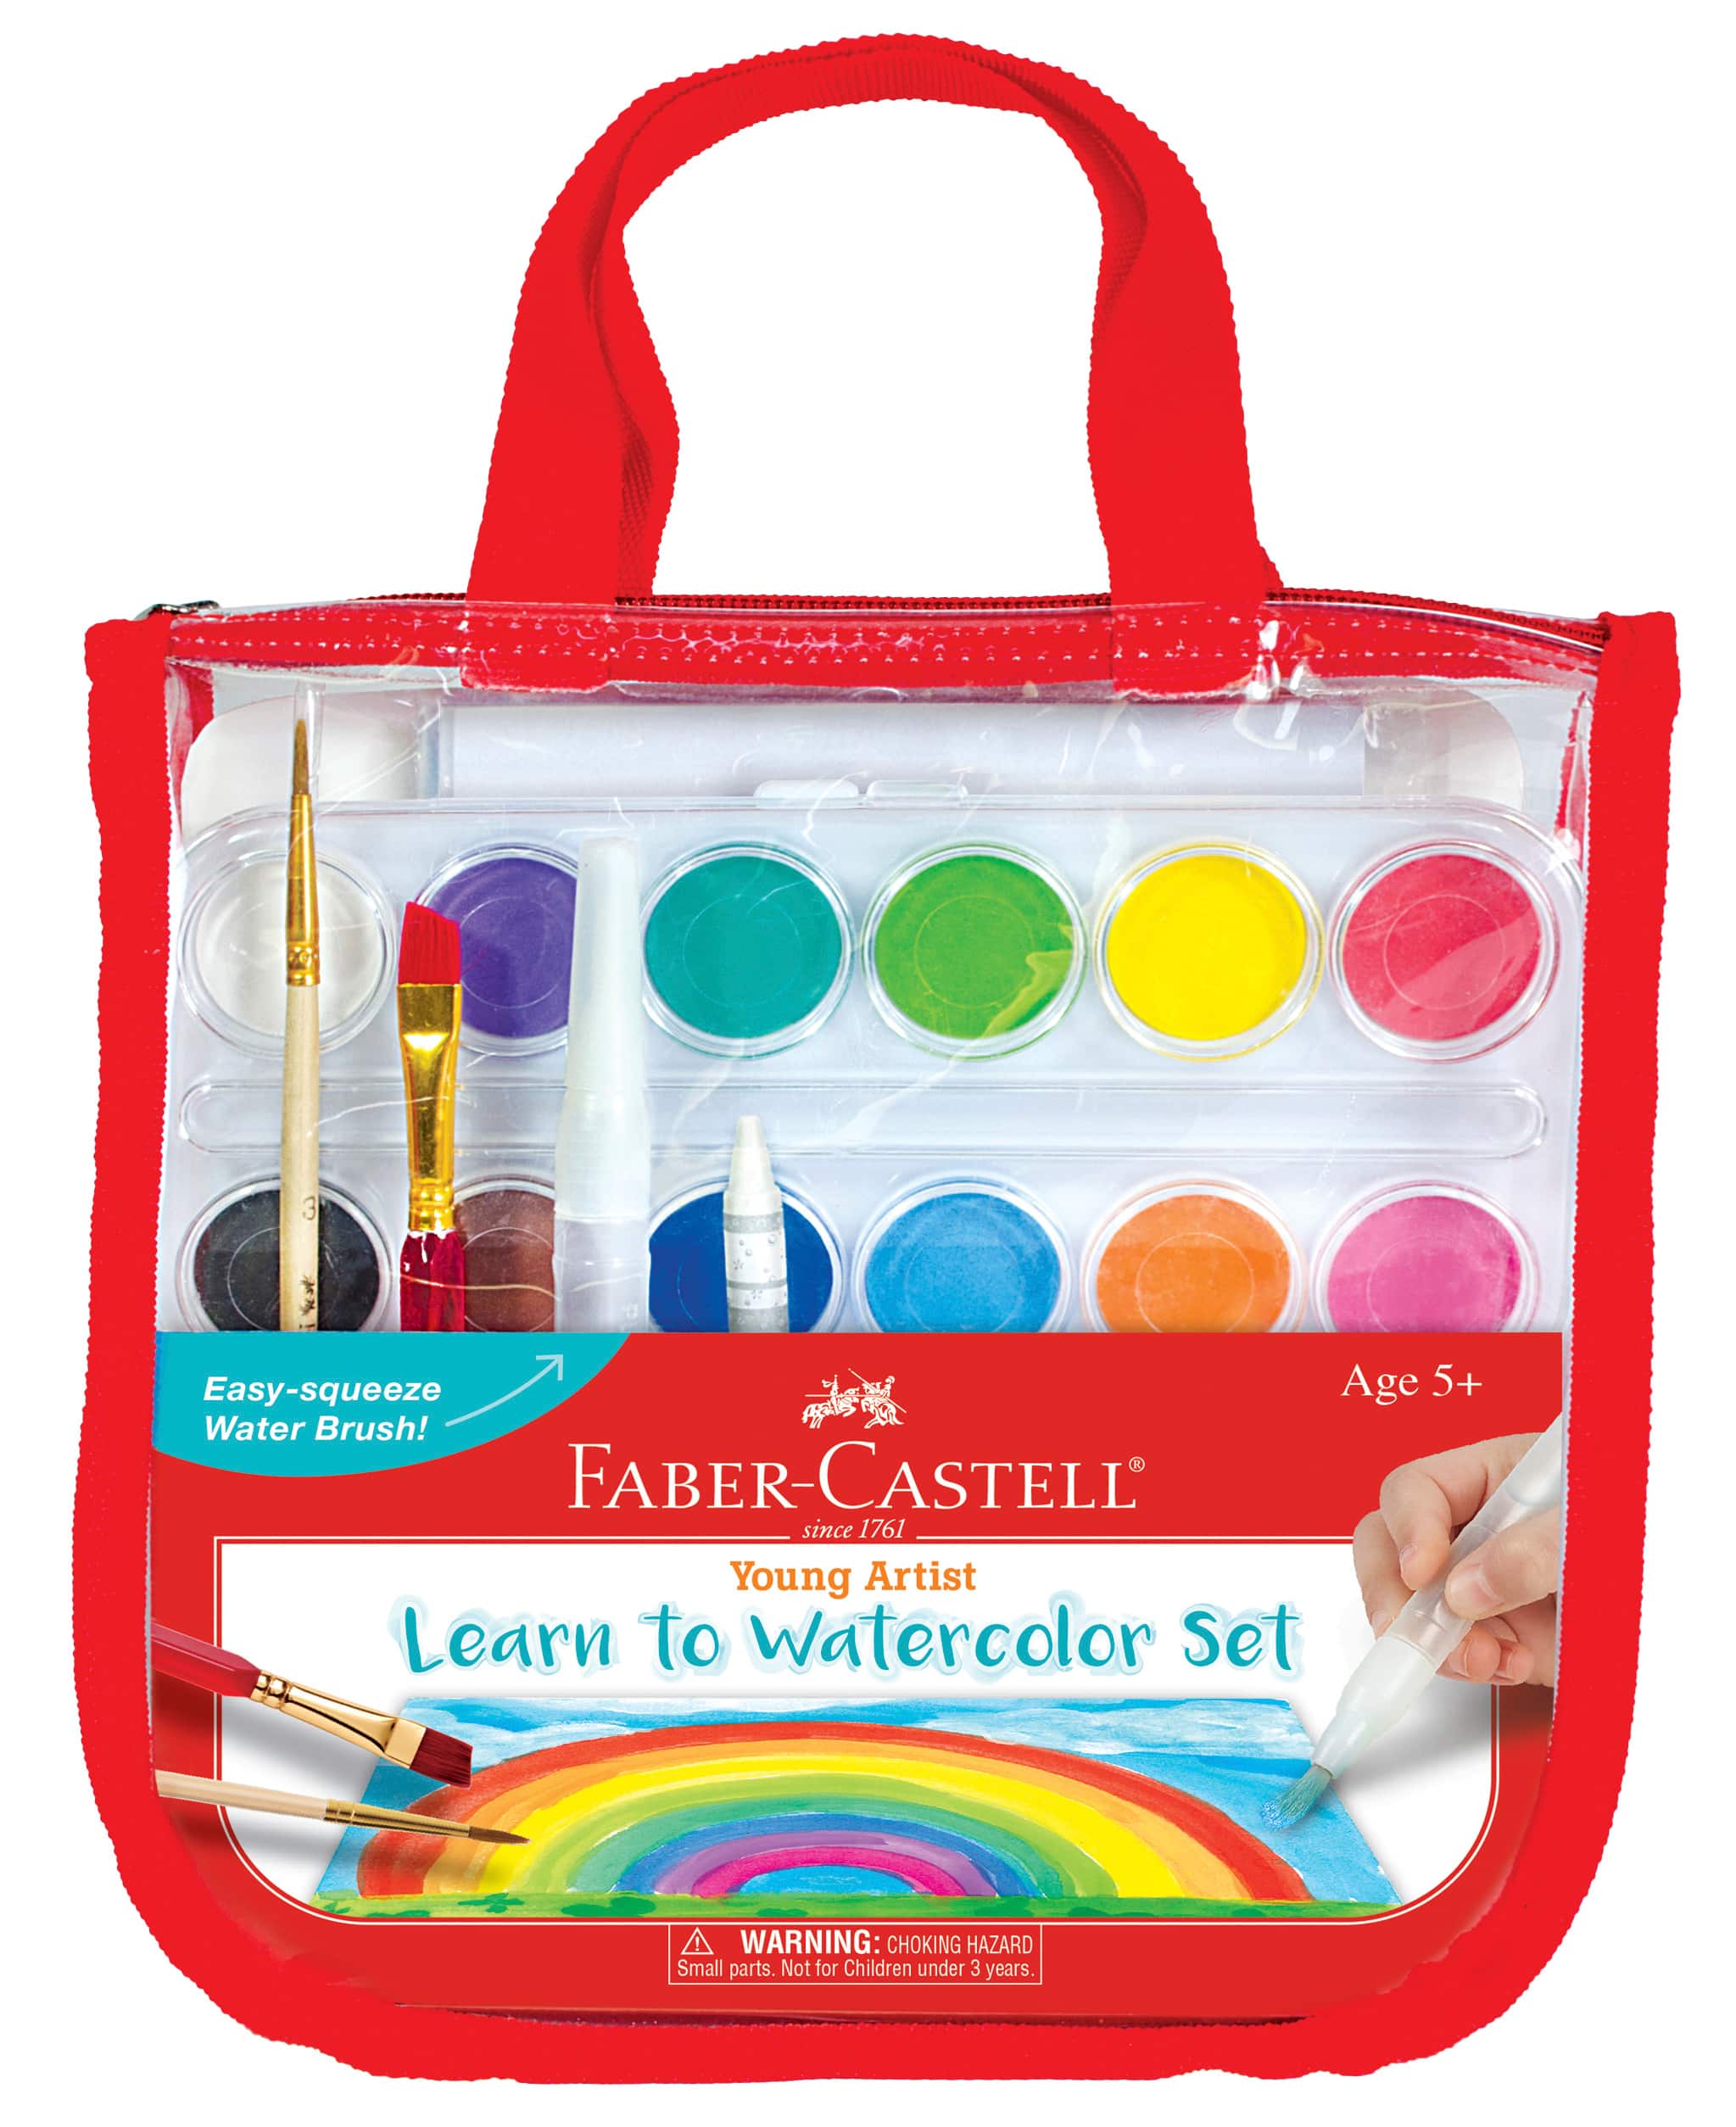 Faber-Castell Young Artist Learn to Watercolor - Watercolor Paint Set for  Kids Ages 5+, Kid-friendly and Washable Watercolor Paint (Packaging May